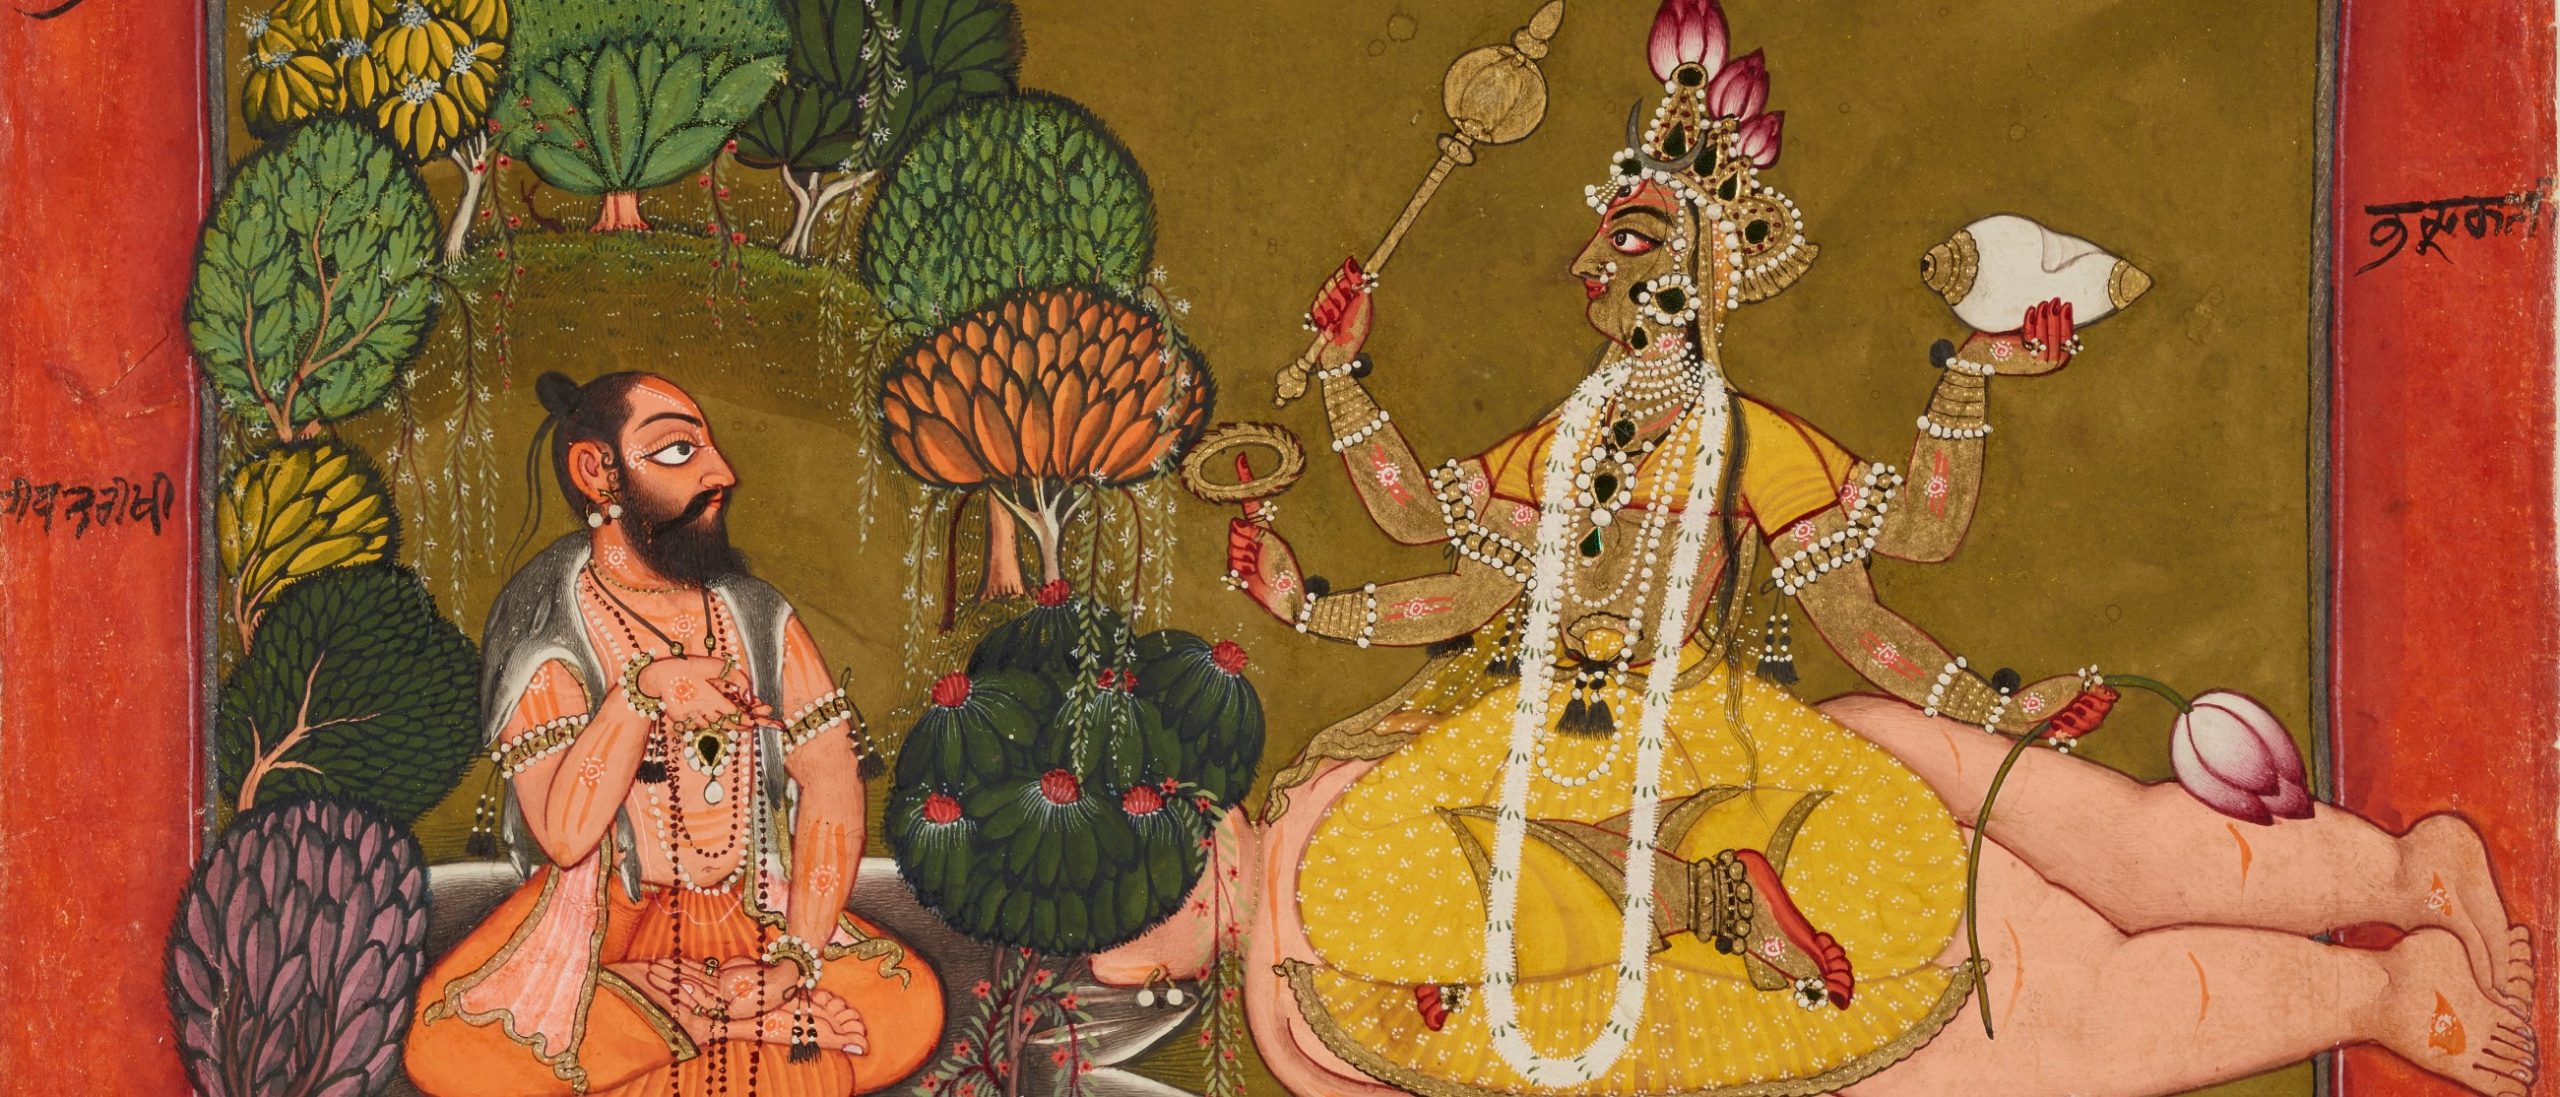 Big Cock And Petite Teen - Devi: The Great Goddess - Smithsonian's National Museum of Asian Art